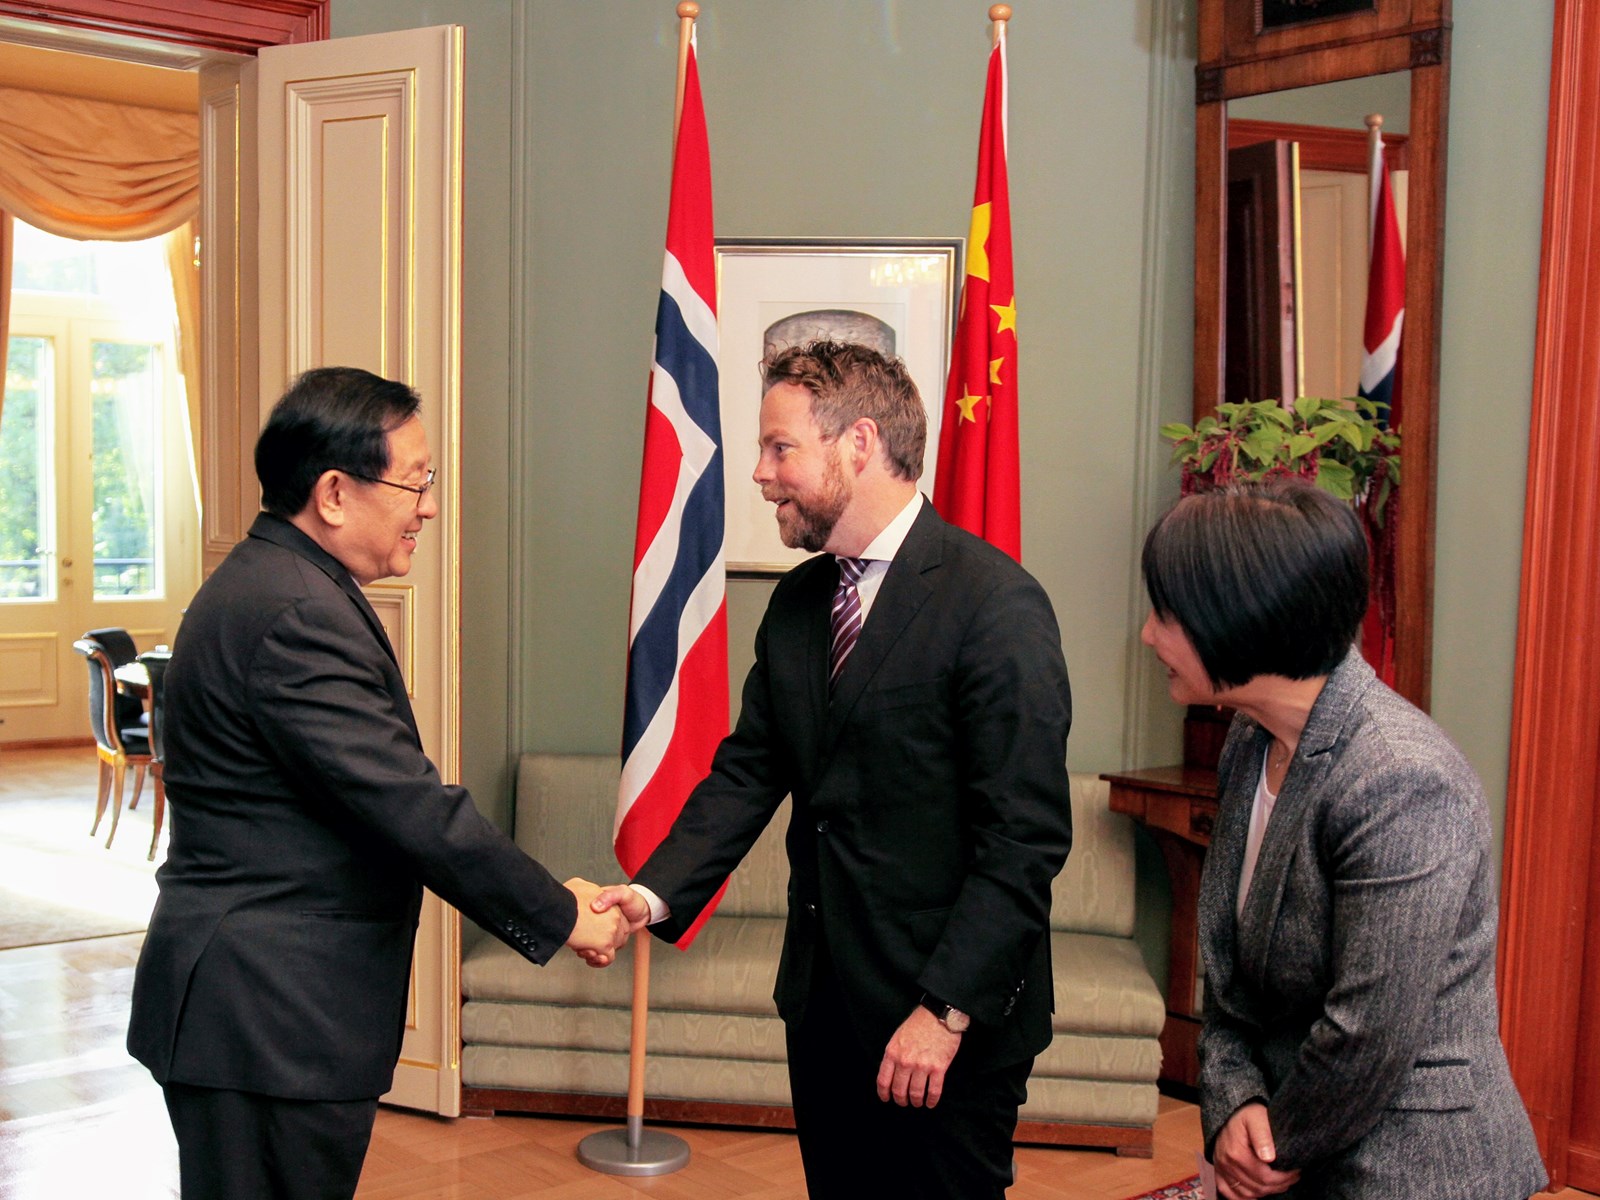 Minister of Education and Research Torbjørn Røe Isaksen and the Chinese Minister of Science and Technology, Dr. Wan Gang.